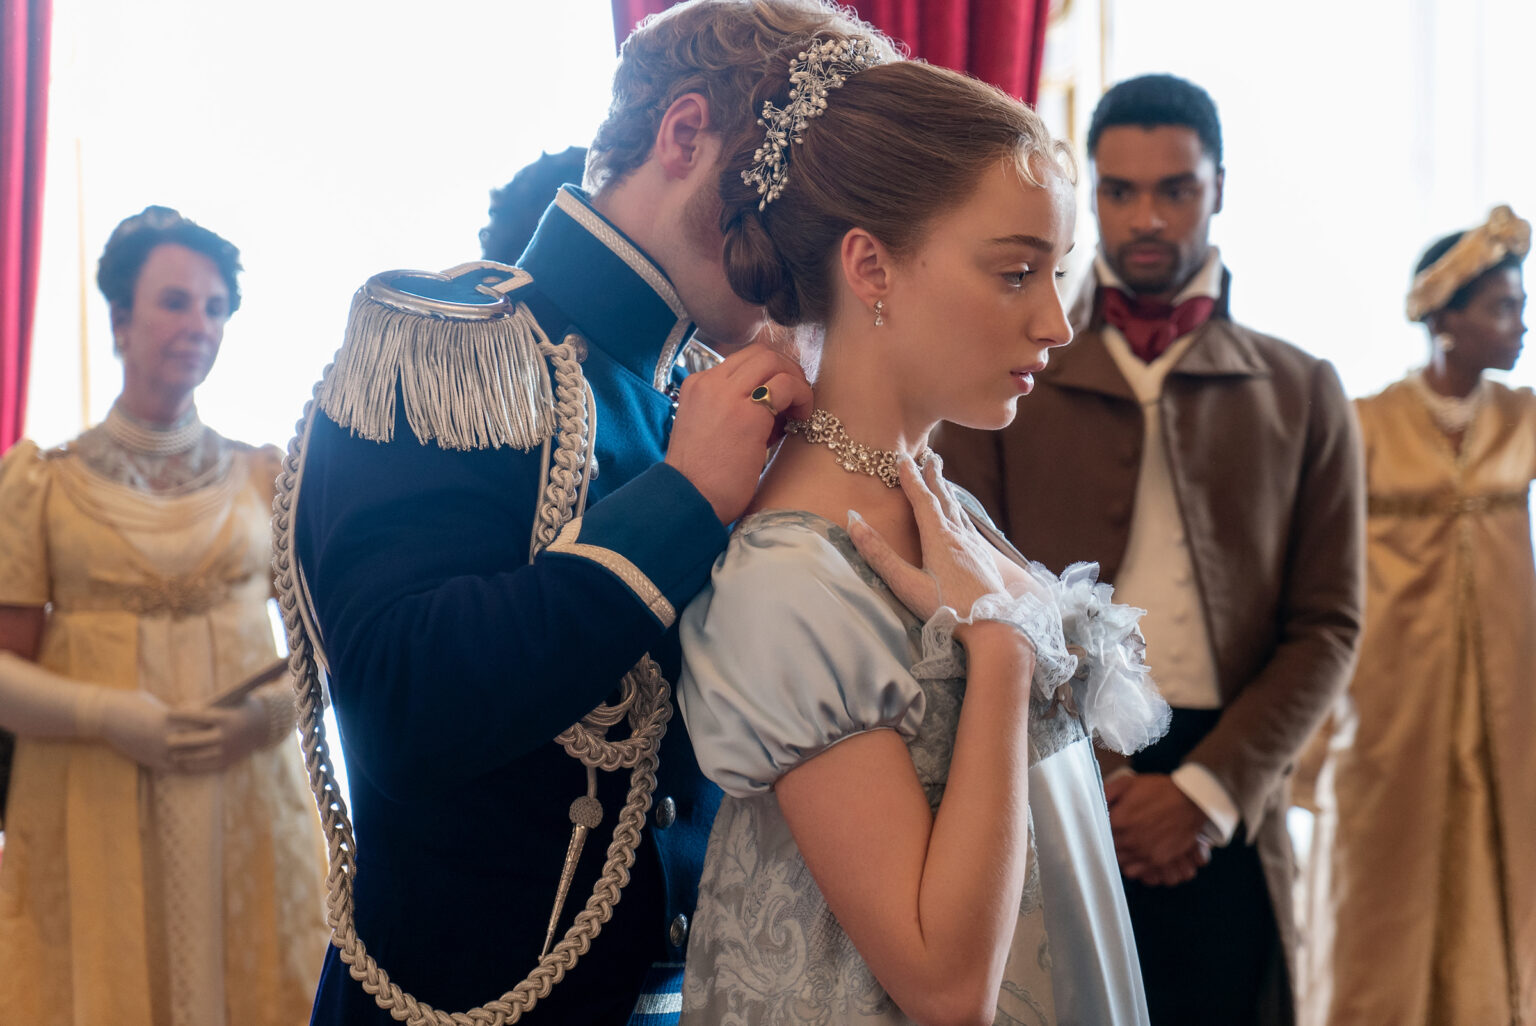 Season two for the 'Bridgerton' series has just been confirmed, but how long until it comes out? Check out these sexy period dramas to watch while you wait.